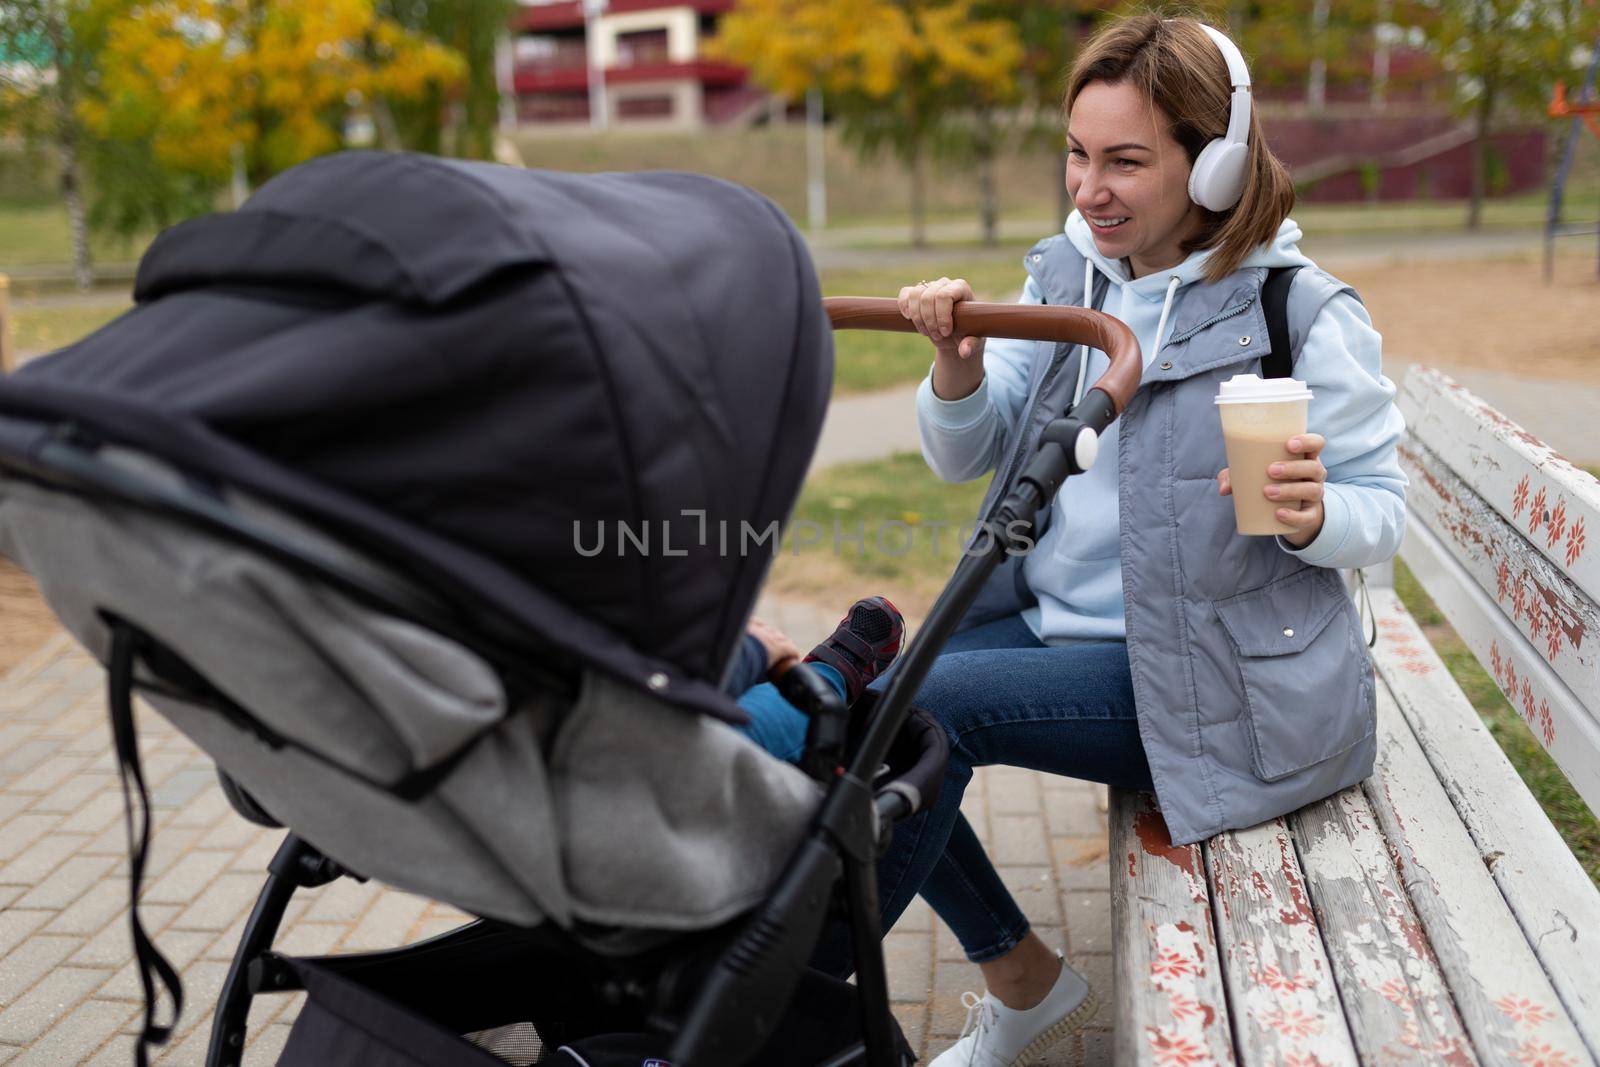 mother with a baby in a stroller sits on a bench and drinks coffee in headphones.